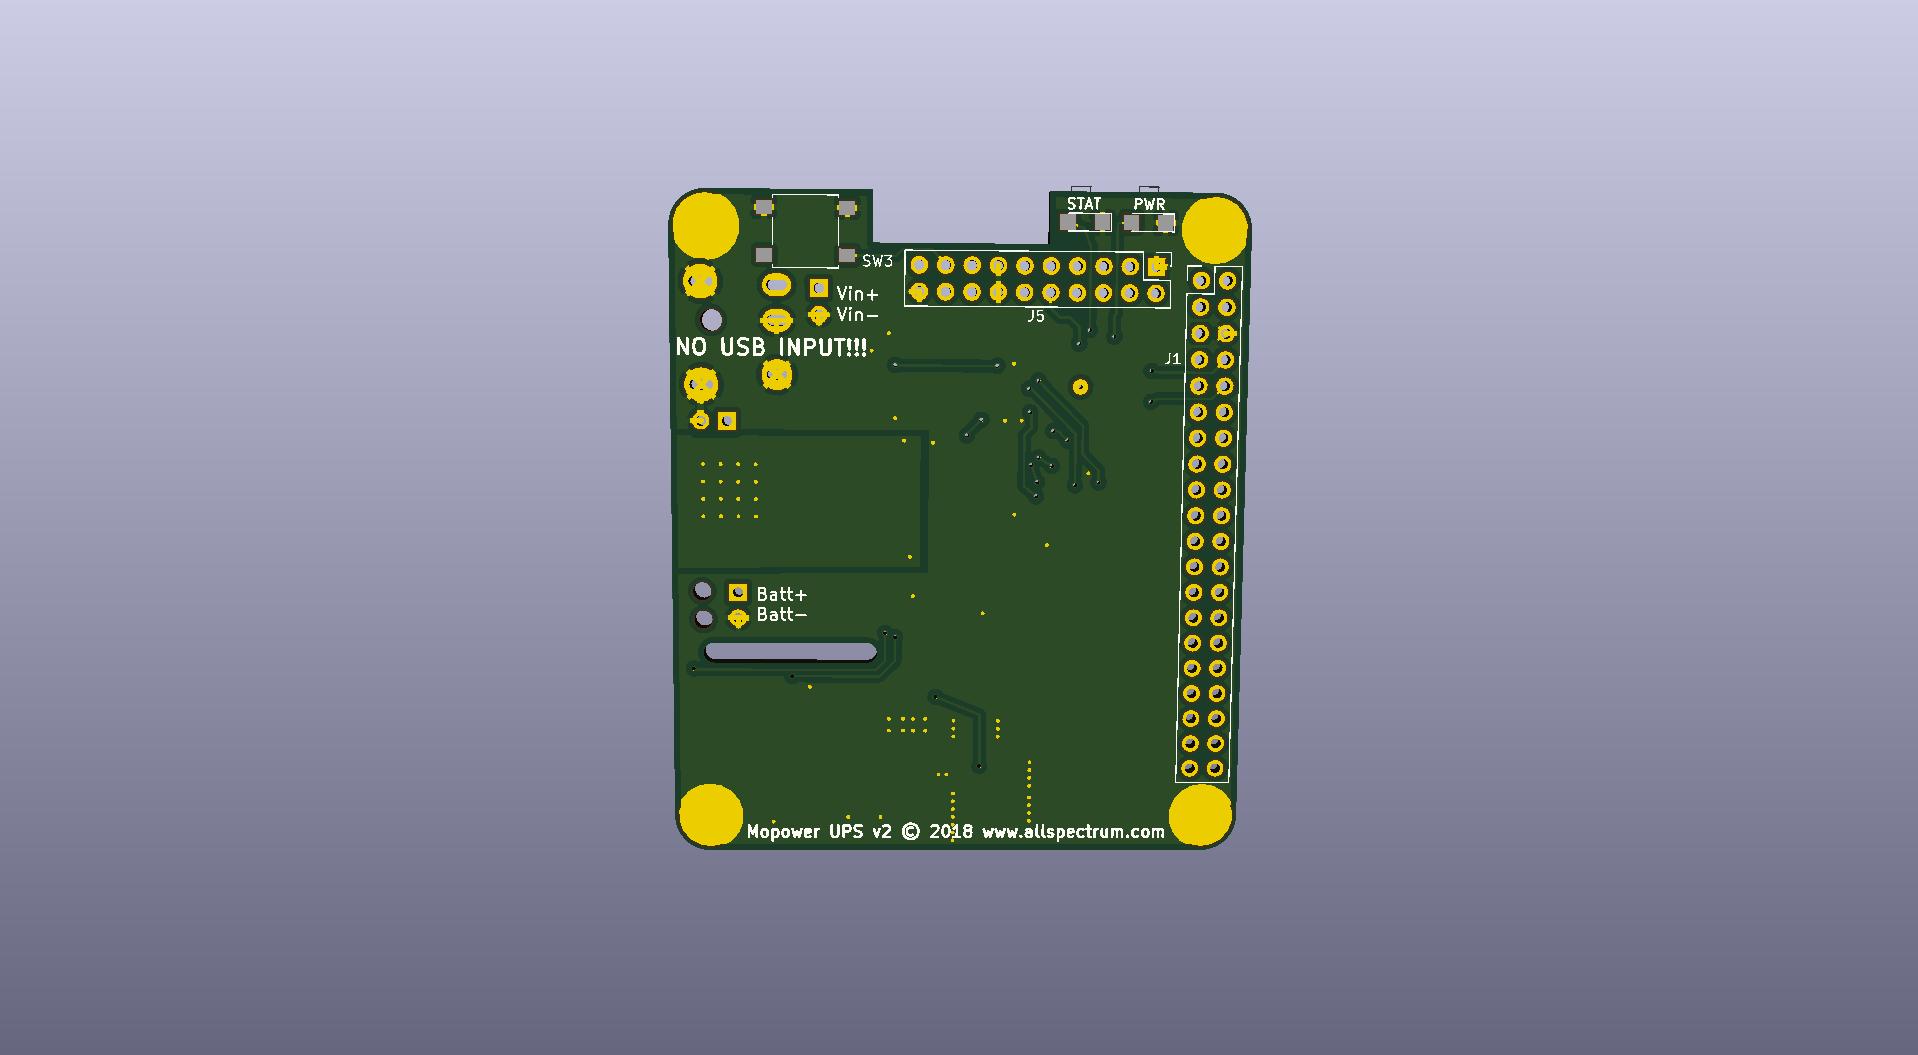 MoPower UPS Hardware Version 2 for the Raspberry Pi with INA219 and AA Batteries